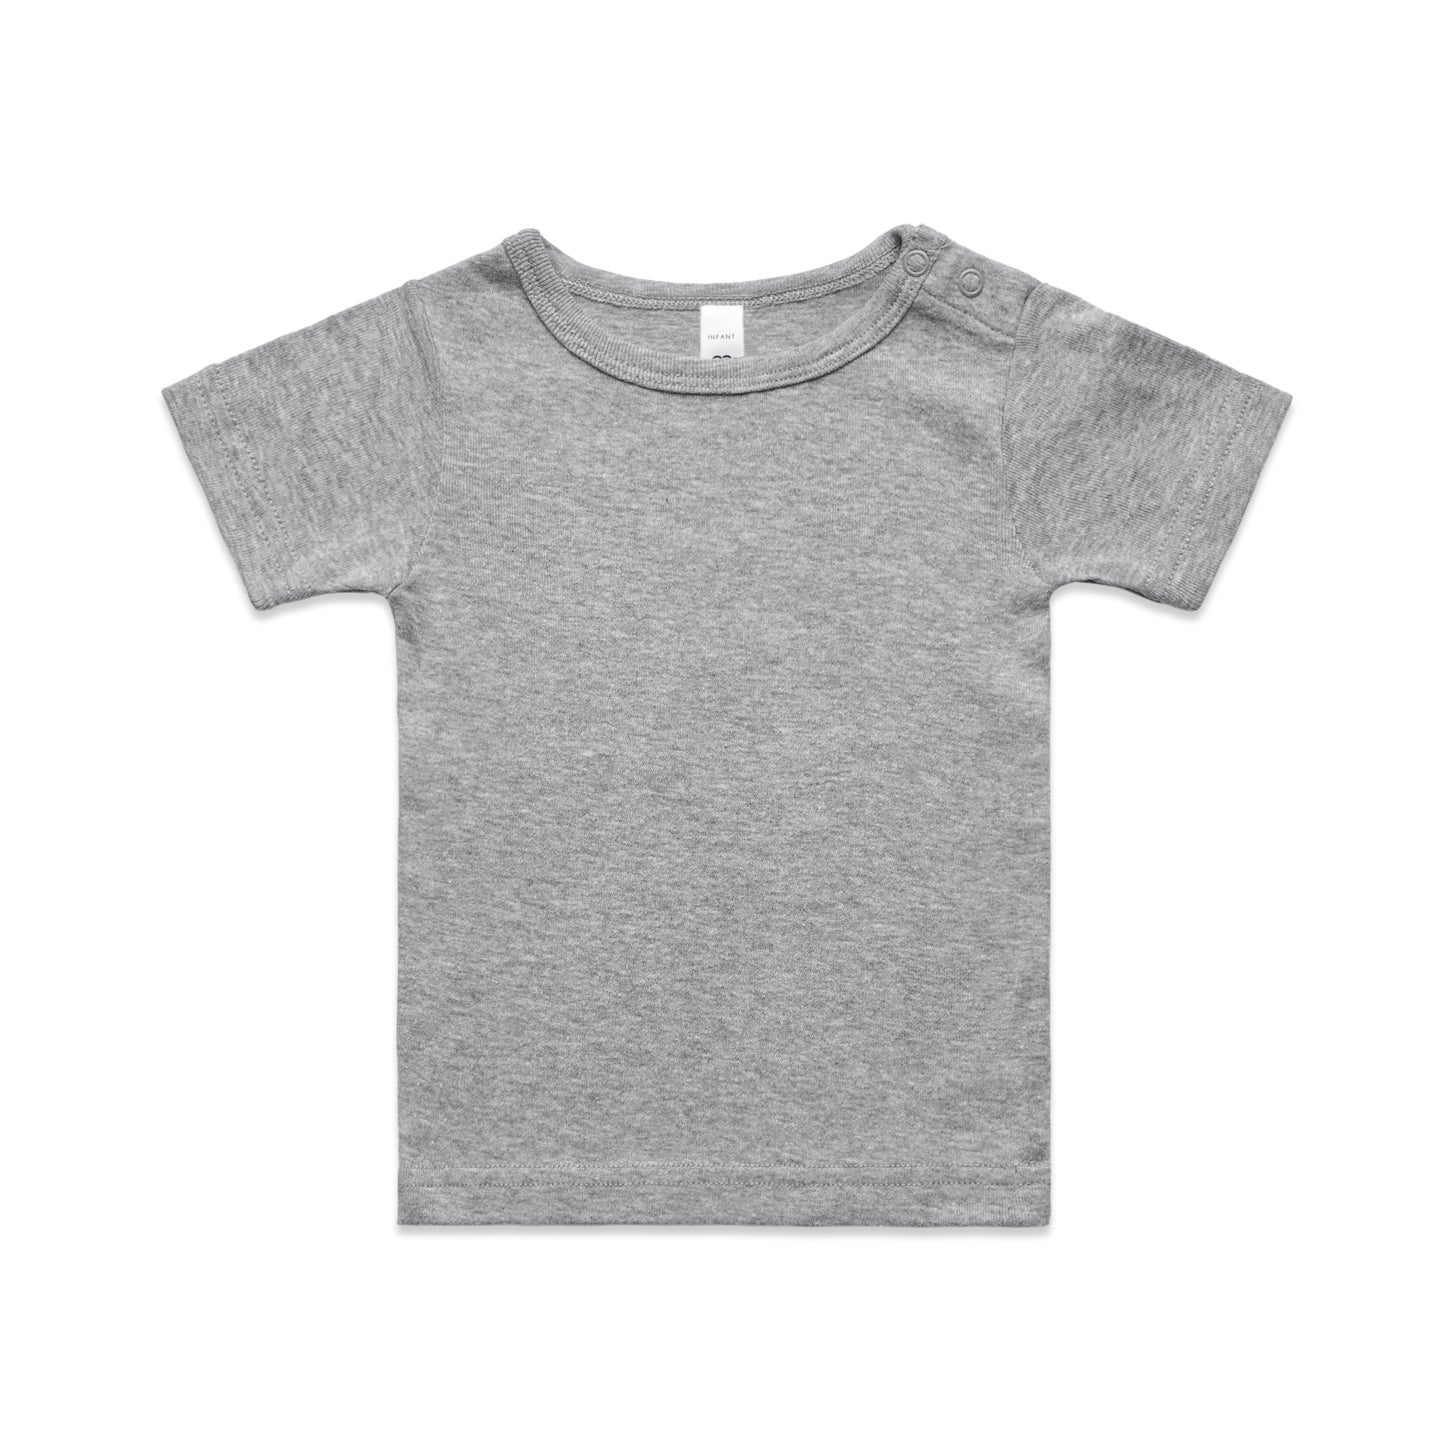 BABY WEE FASHION TEE | AS Colour